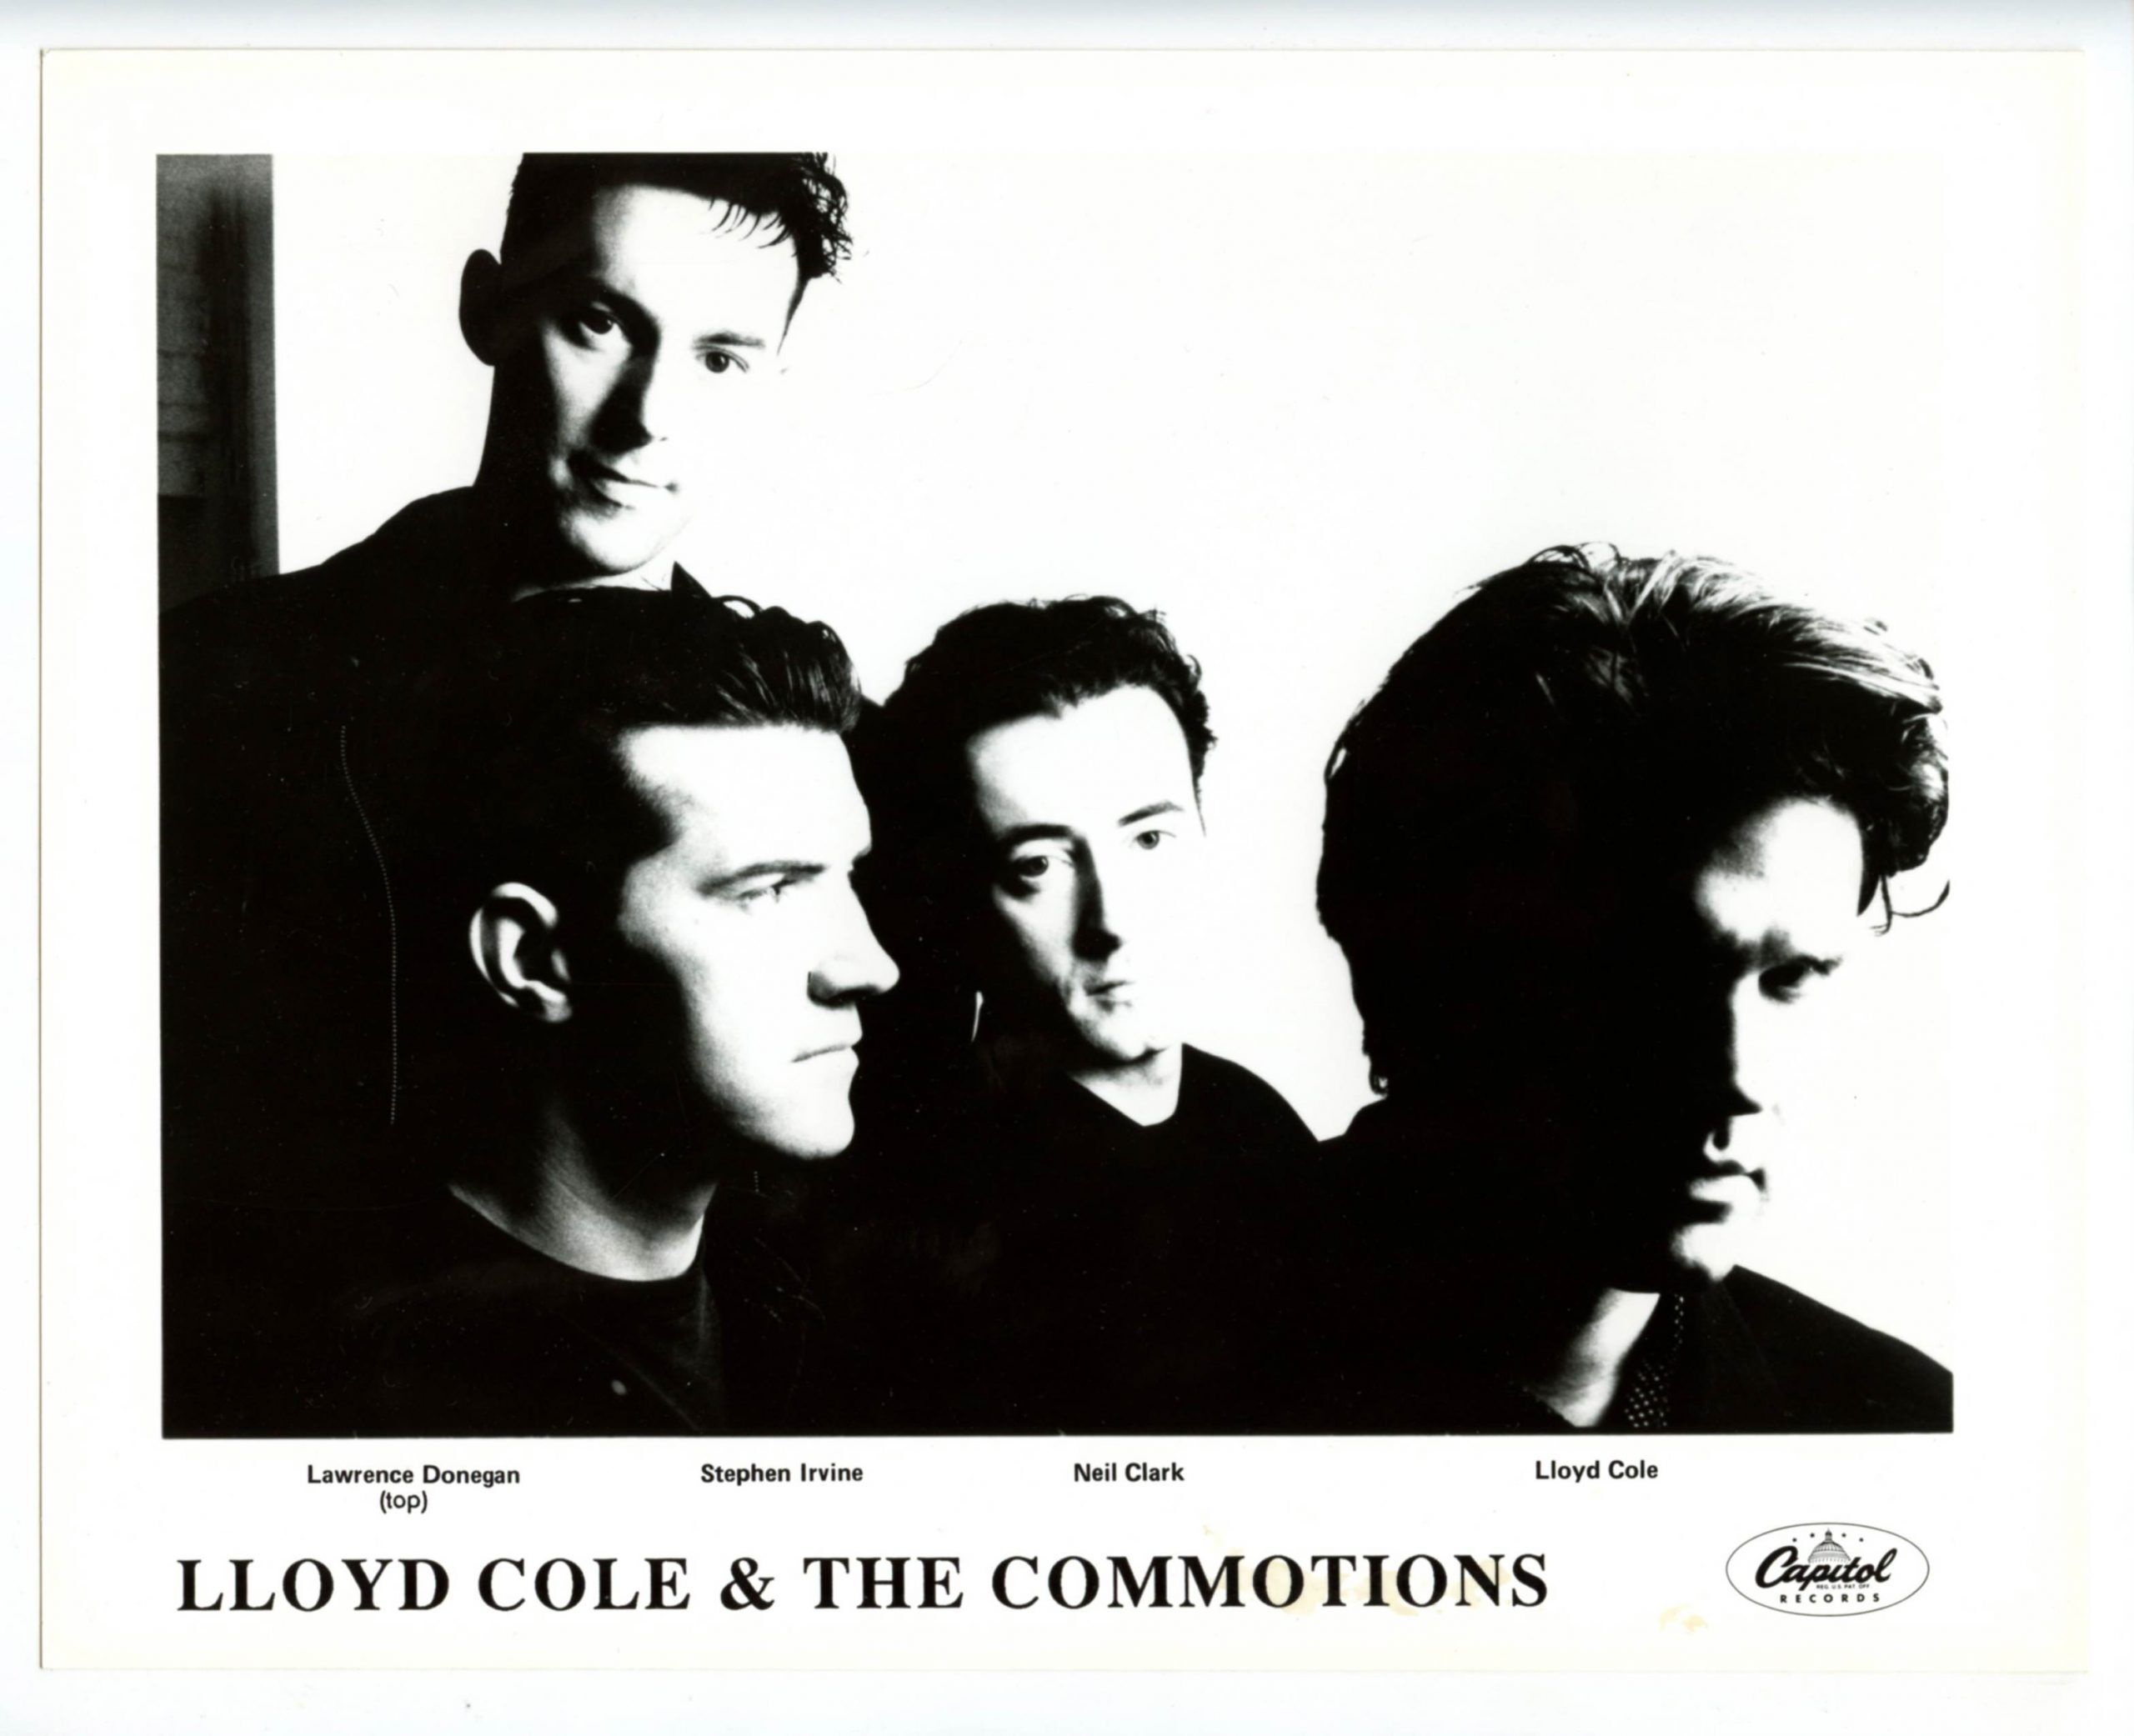 Lloyd Cole & The Commotions Photo 1980s Capitol Records